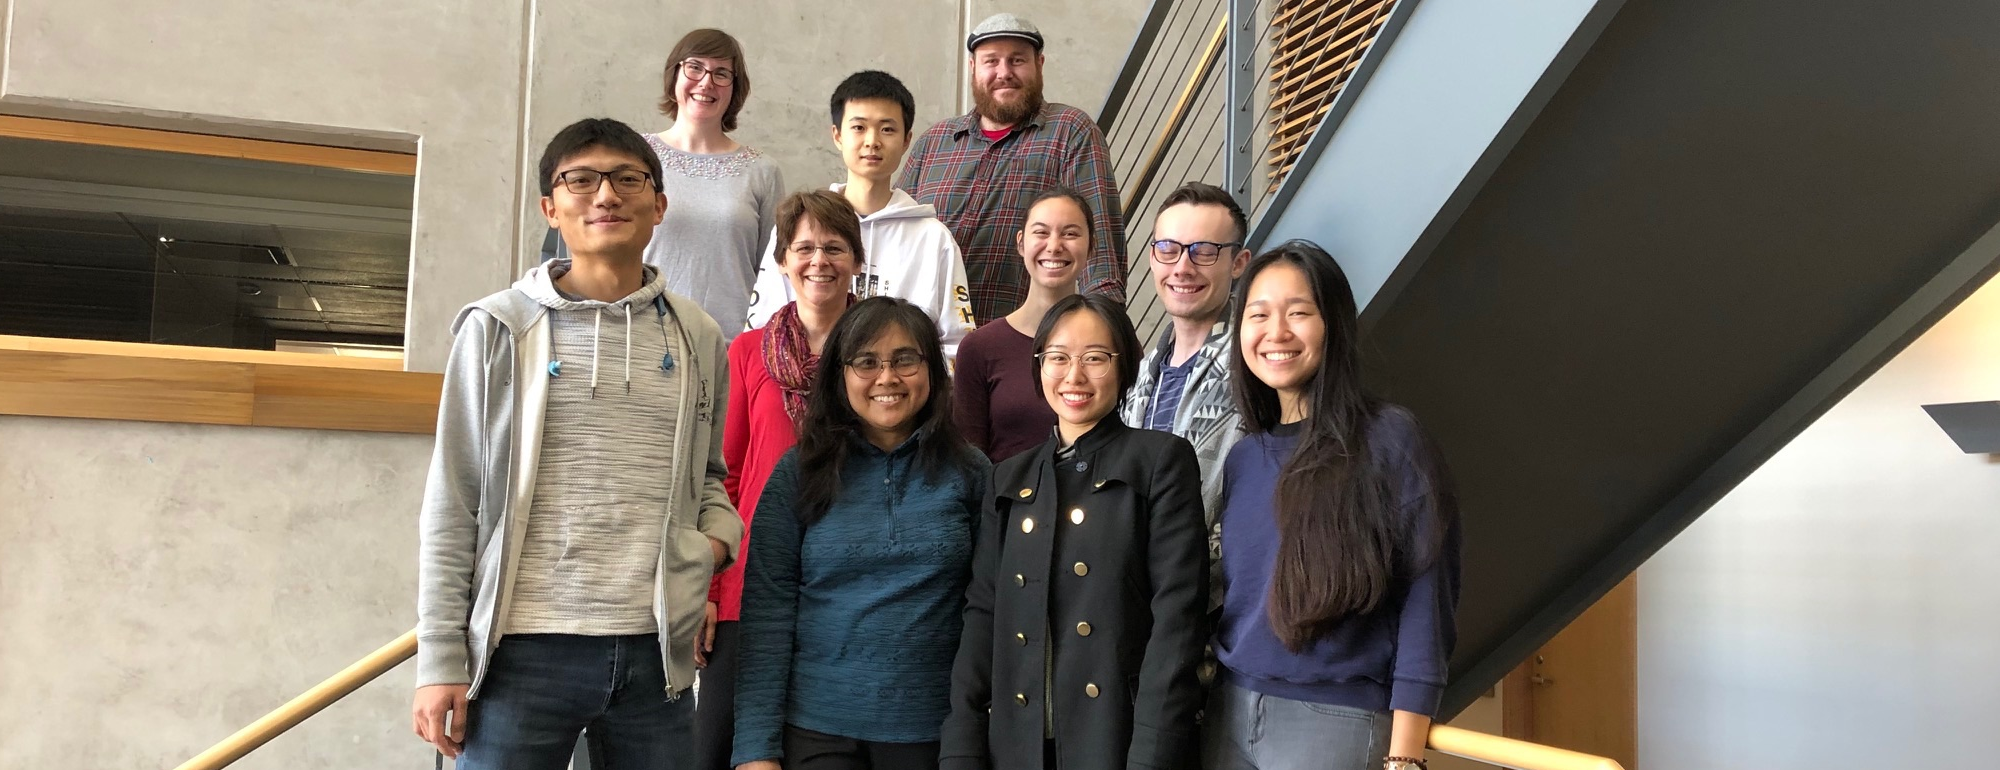 Boundy-Mills research lab group photo taken in the Robert Mondavi Institute North building December 2019